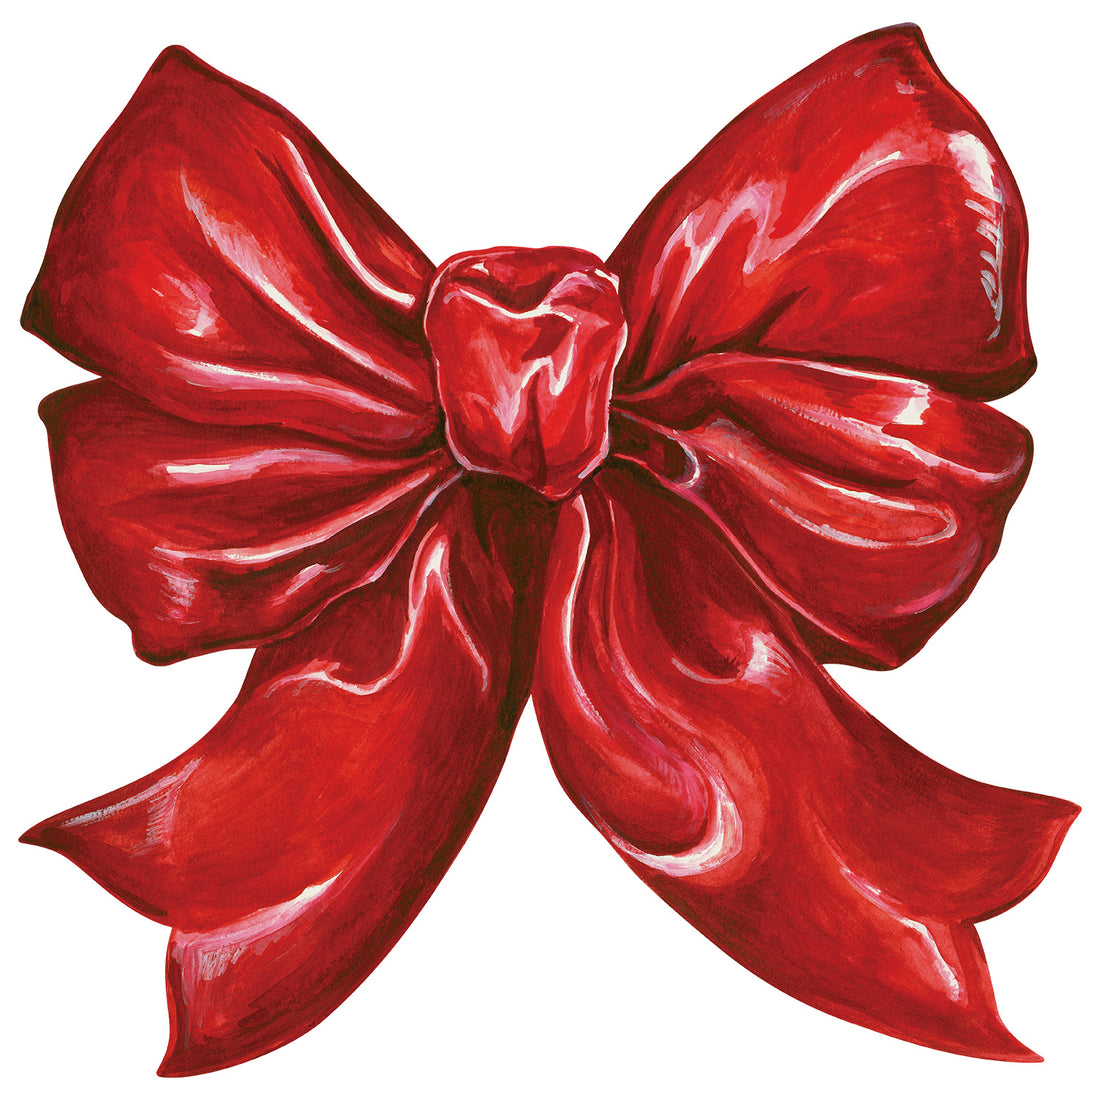 A die-cut illustration of a big bow of shiny red ribbon, as found on a gift.